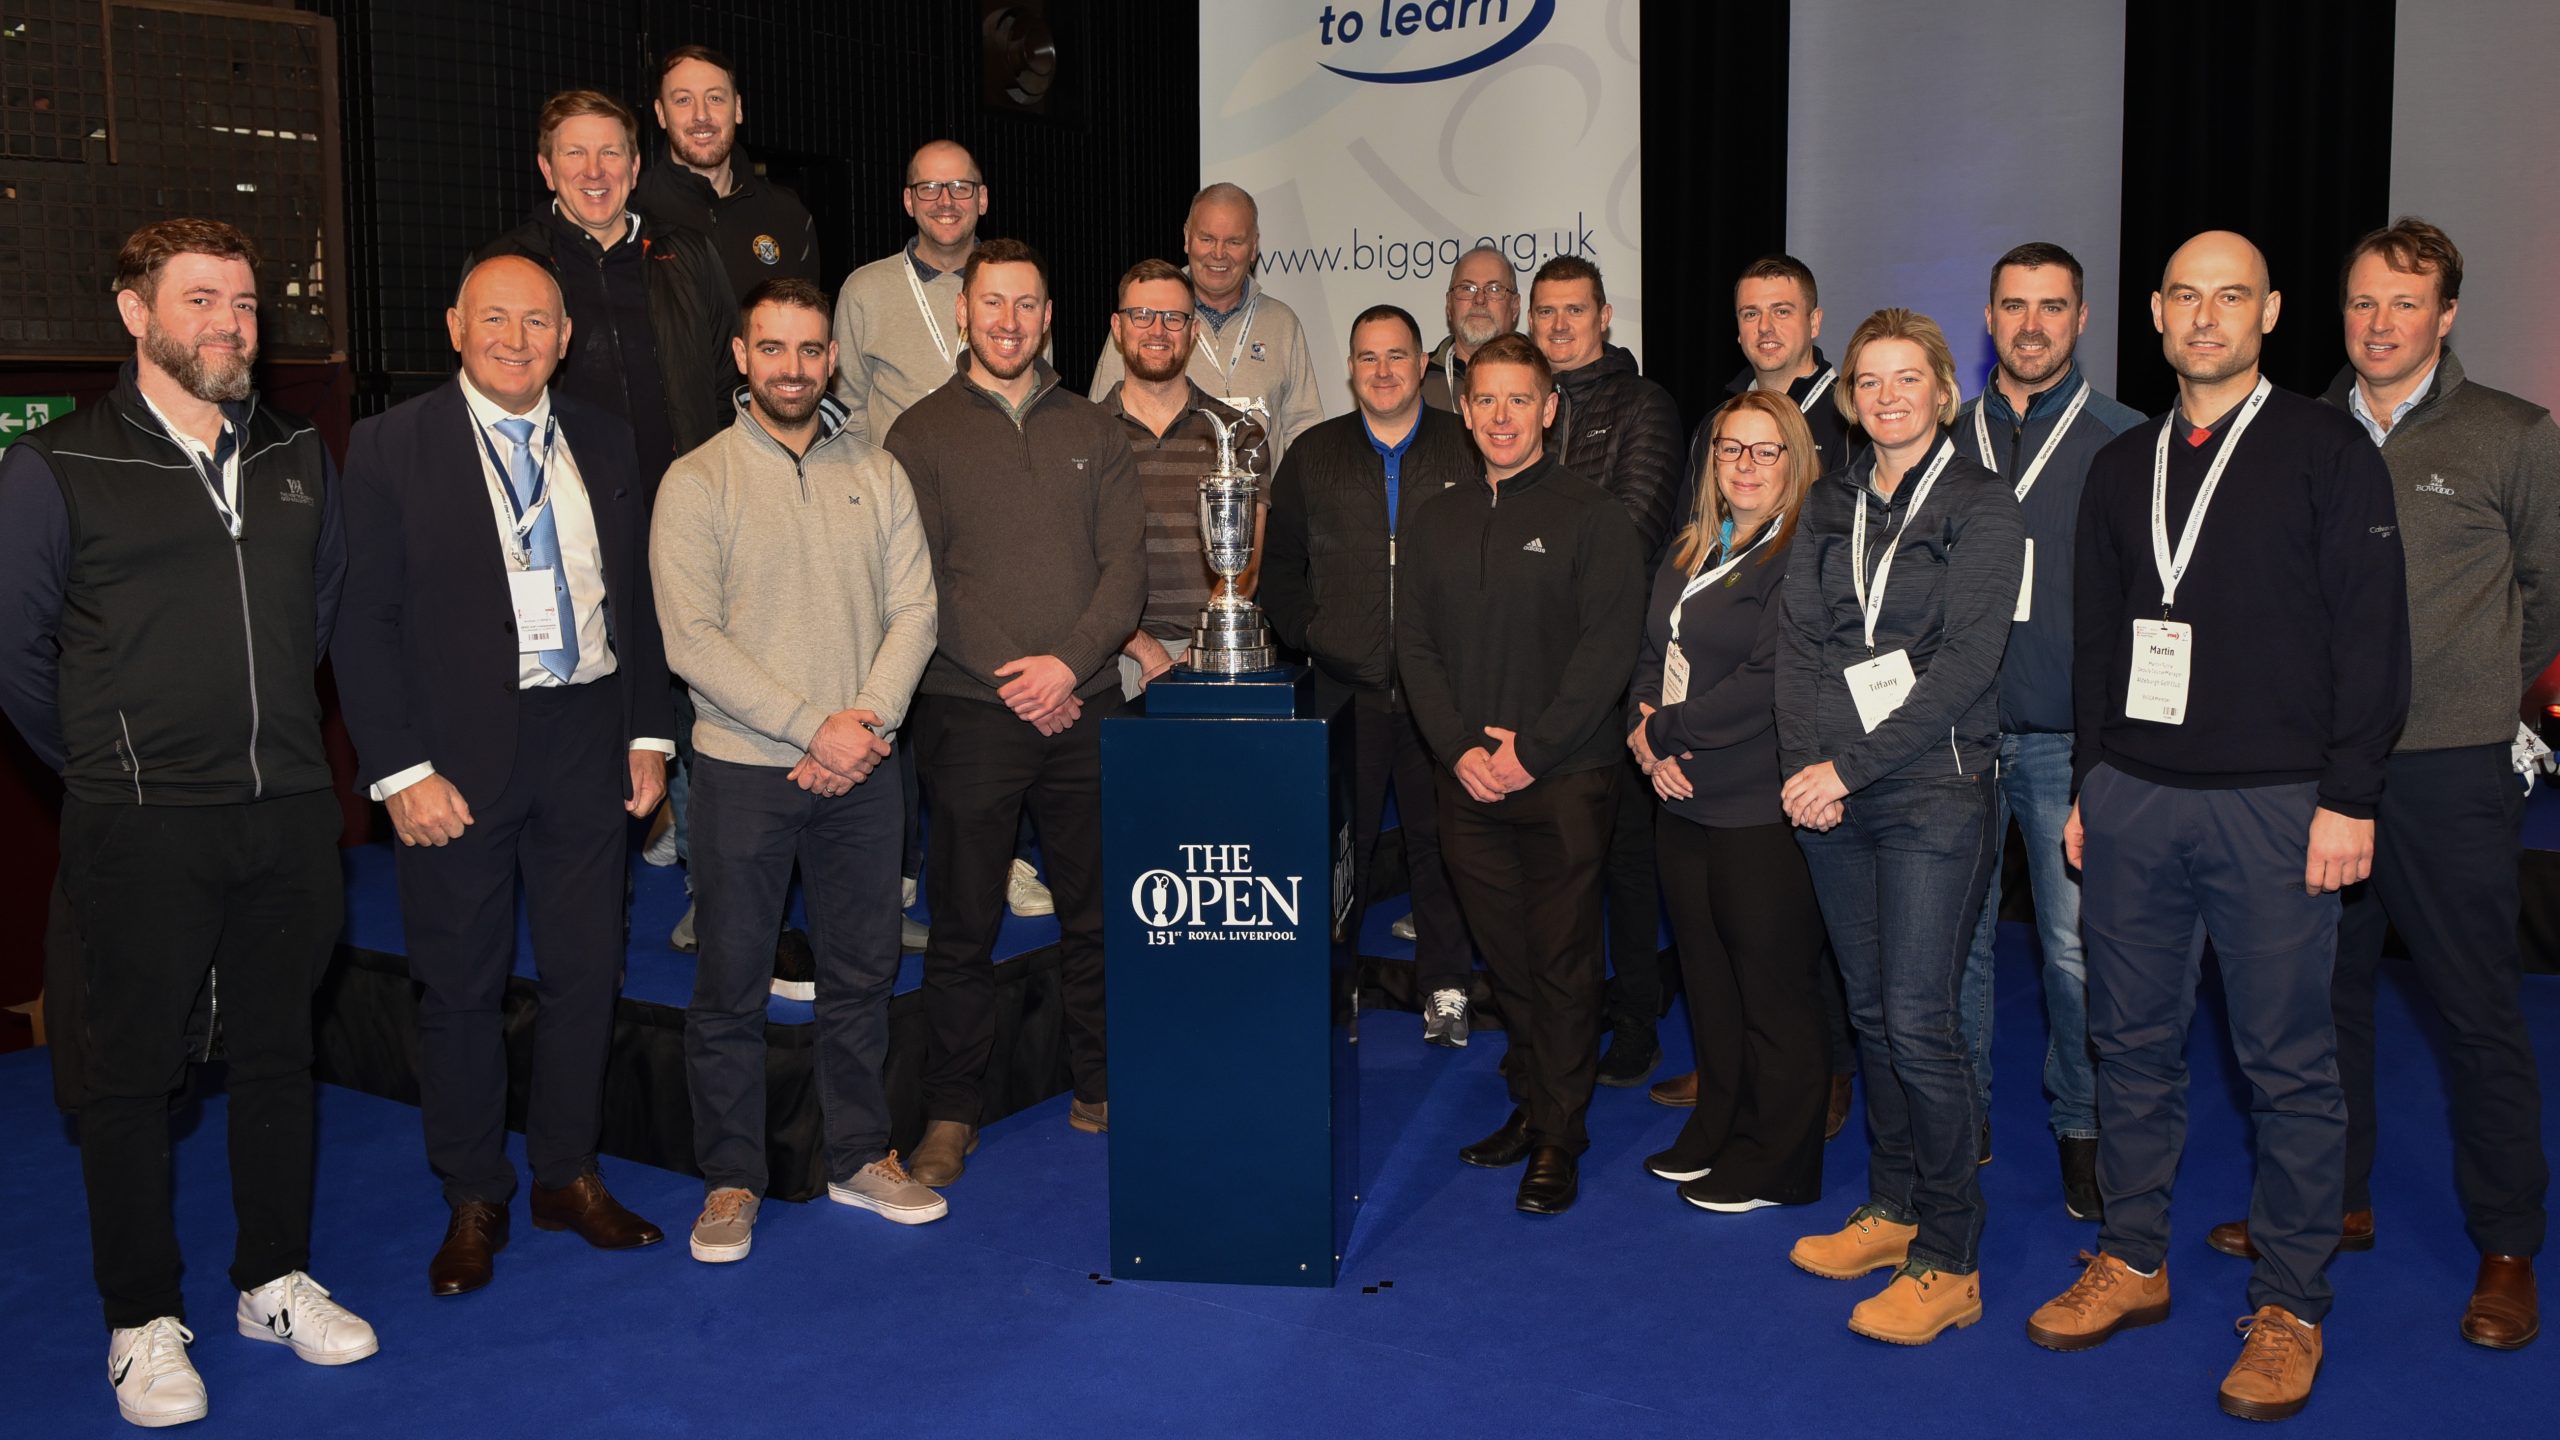 Previous members of The Open Volunteer Support Team joinerd the Claret Jug on stage at BTME in January